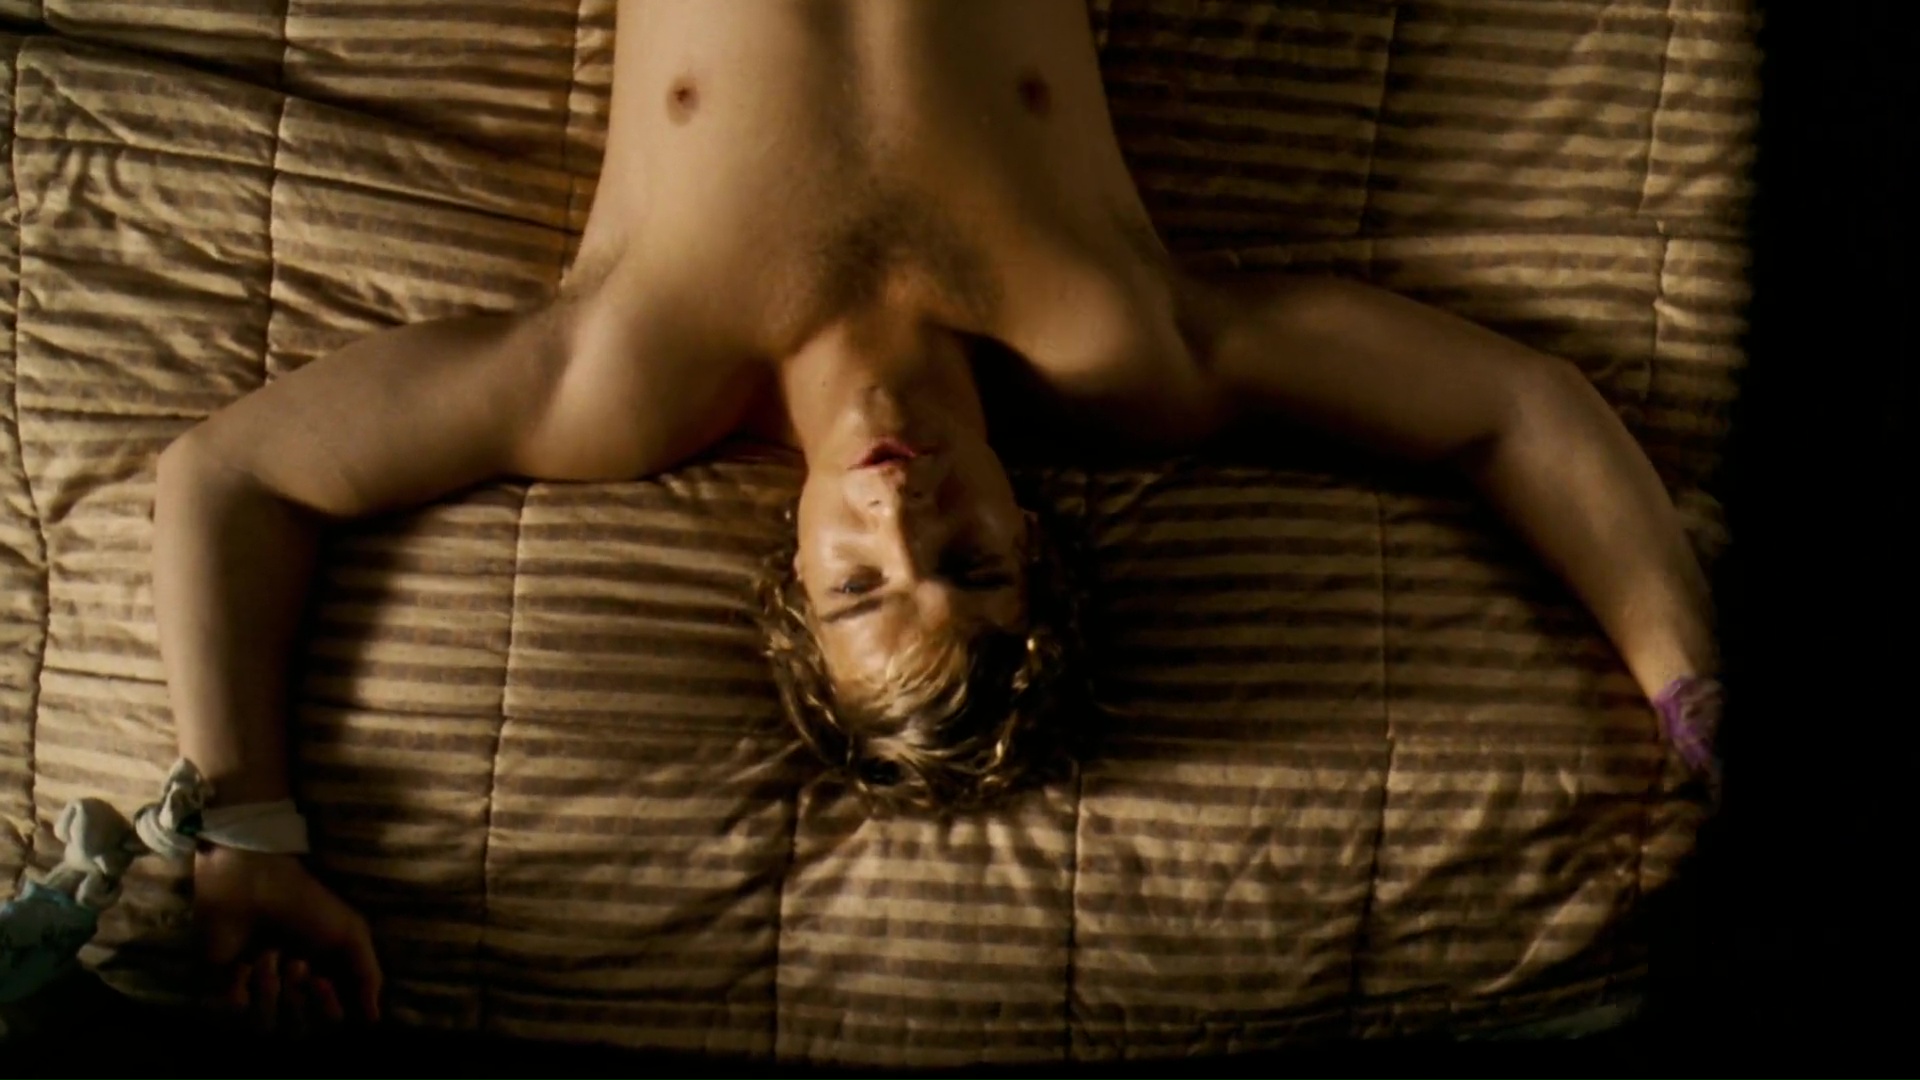 Taylor Handley shirtless in The Texas Chainsaw Massacre: The Beginning.